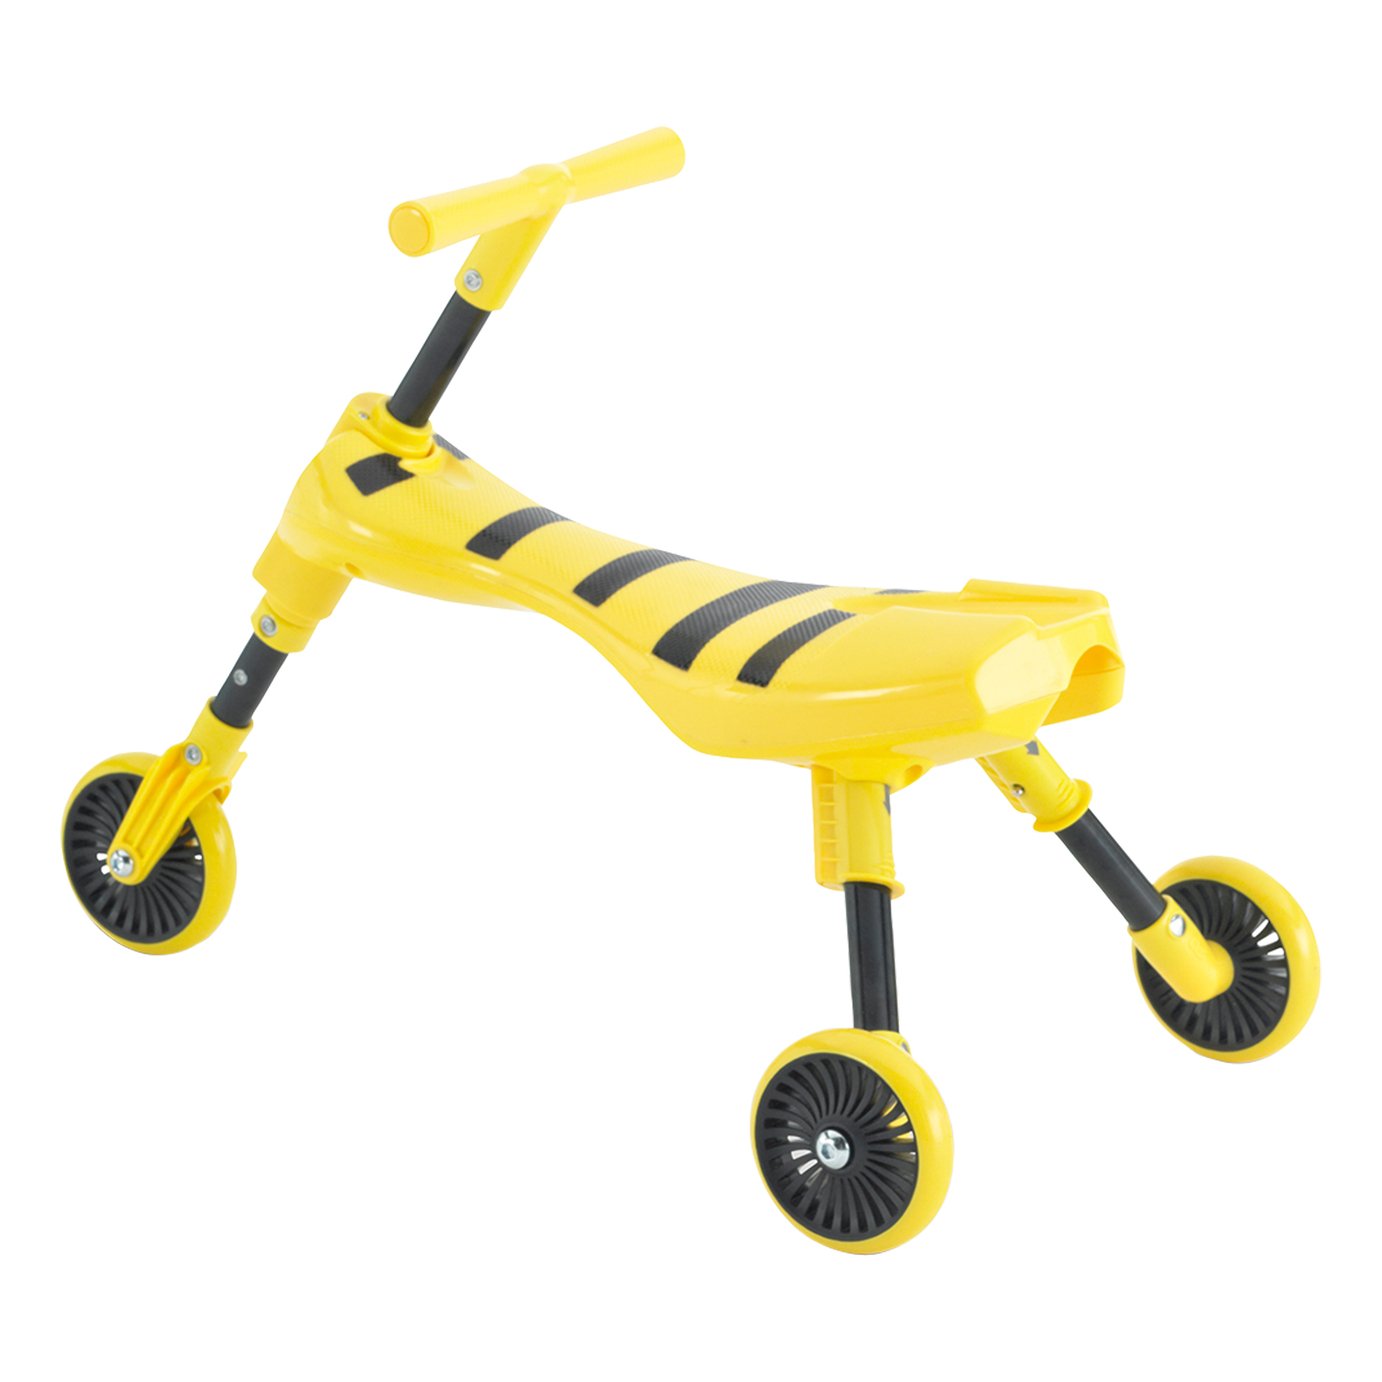 Scuttlebug Bumblebee Ride On Review